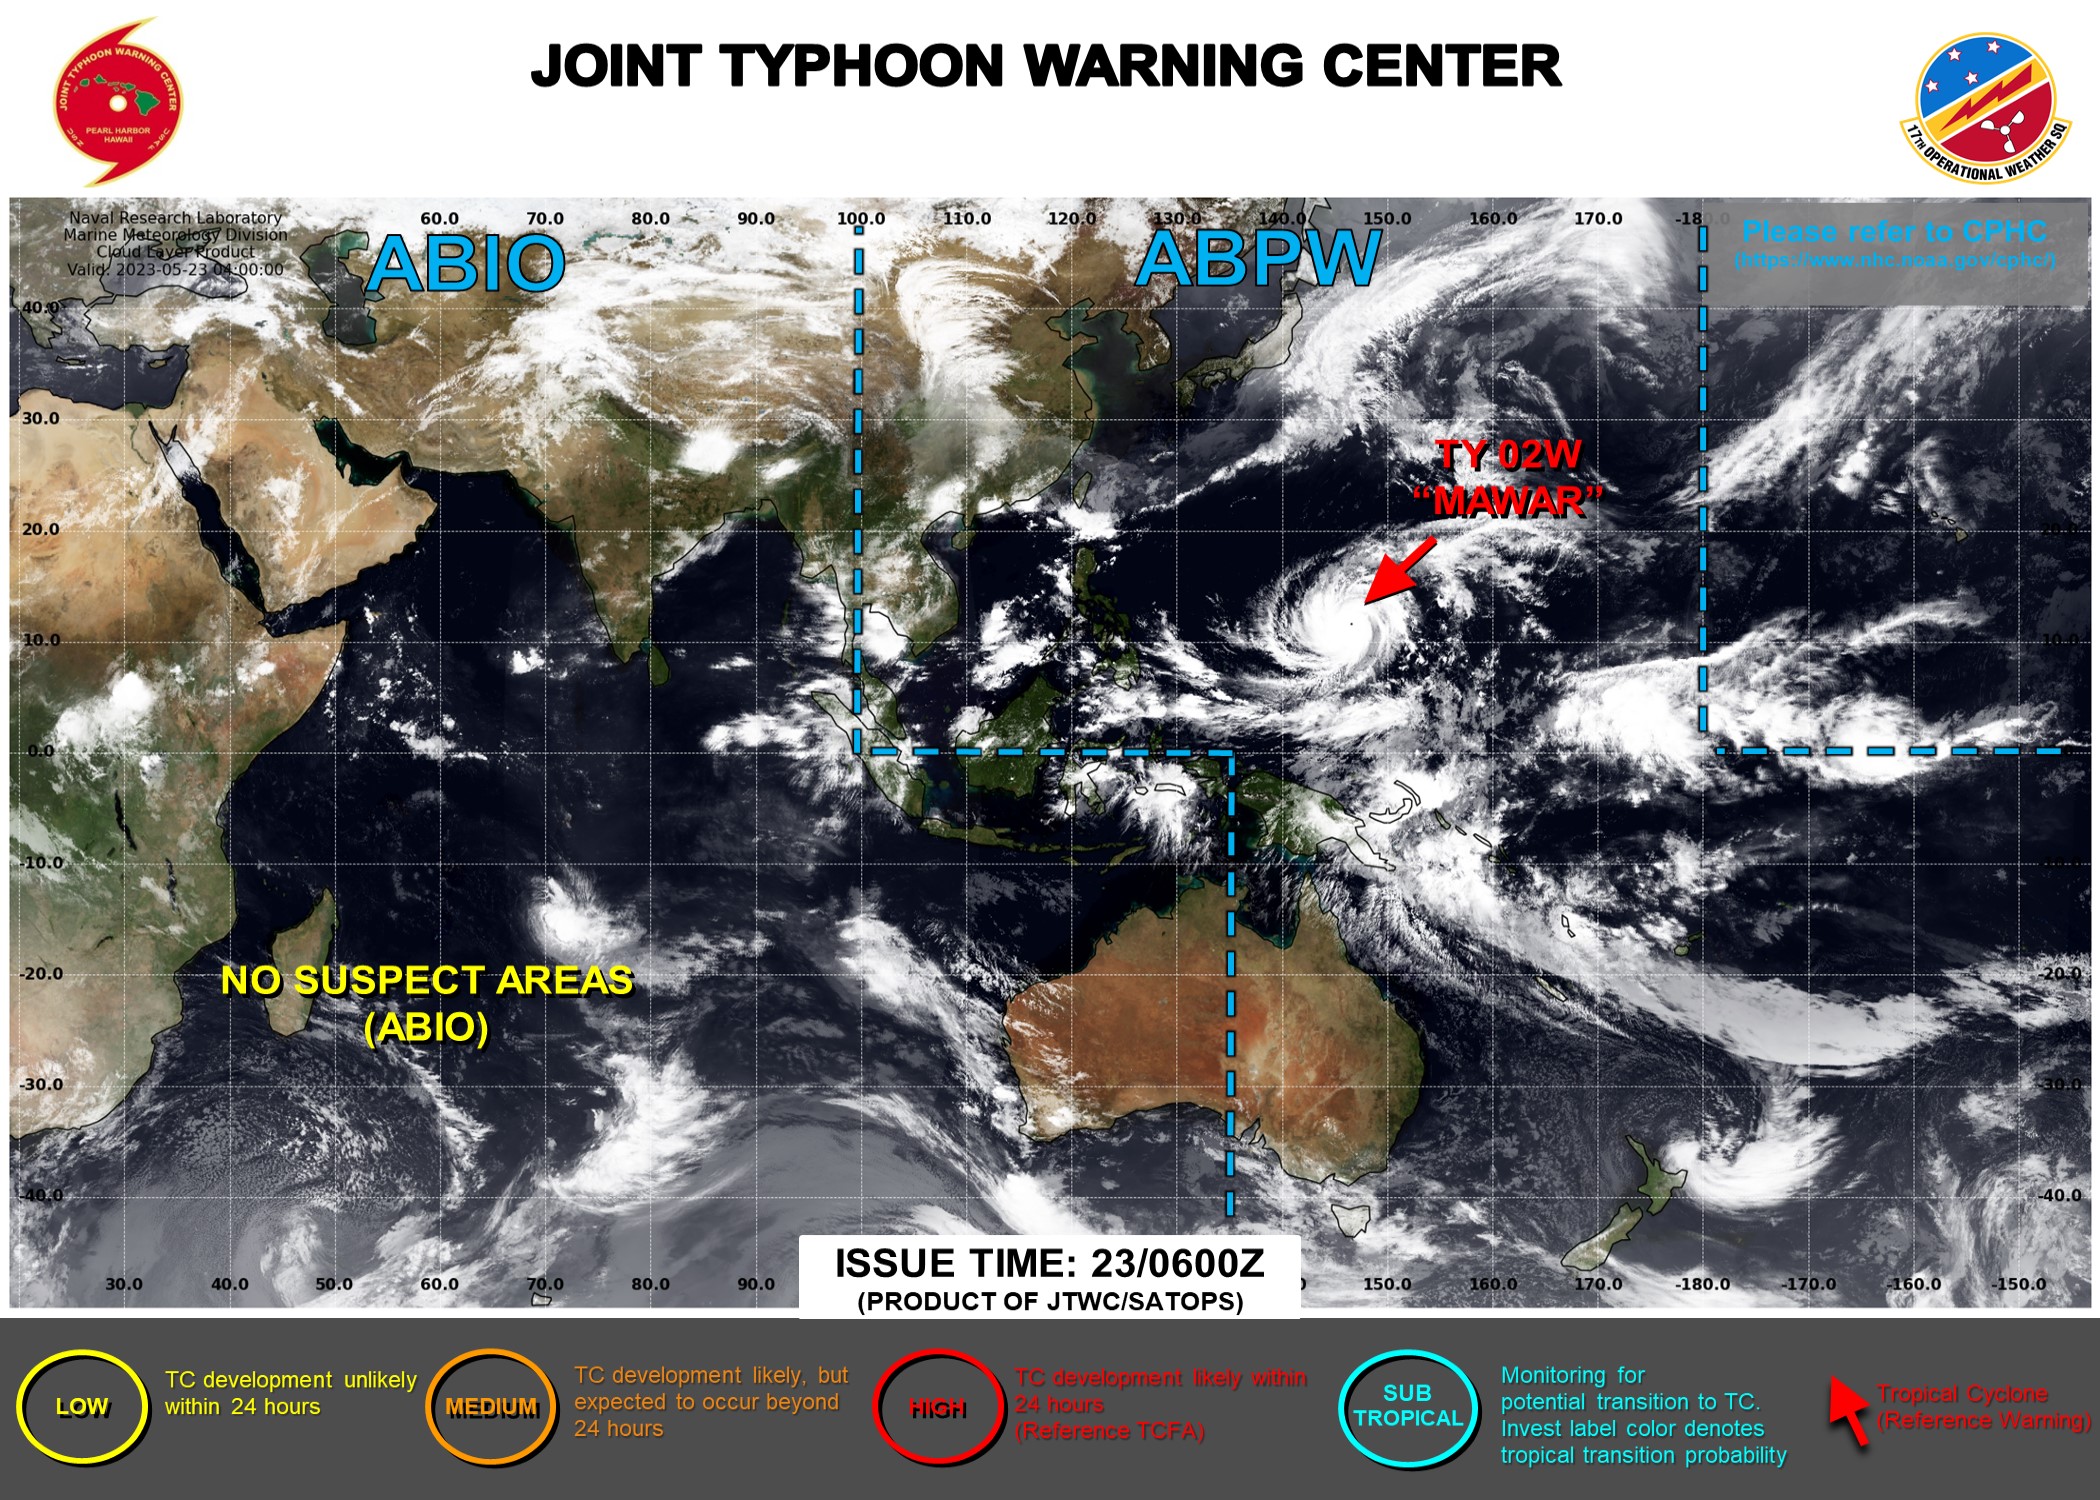 JTWC IS ISSUING 6HOURLY WARNINGS AND 3HOURLY SATELLITE BULLETINS ON STY 02W(MAWAR).